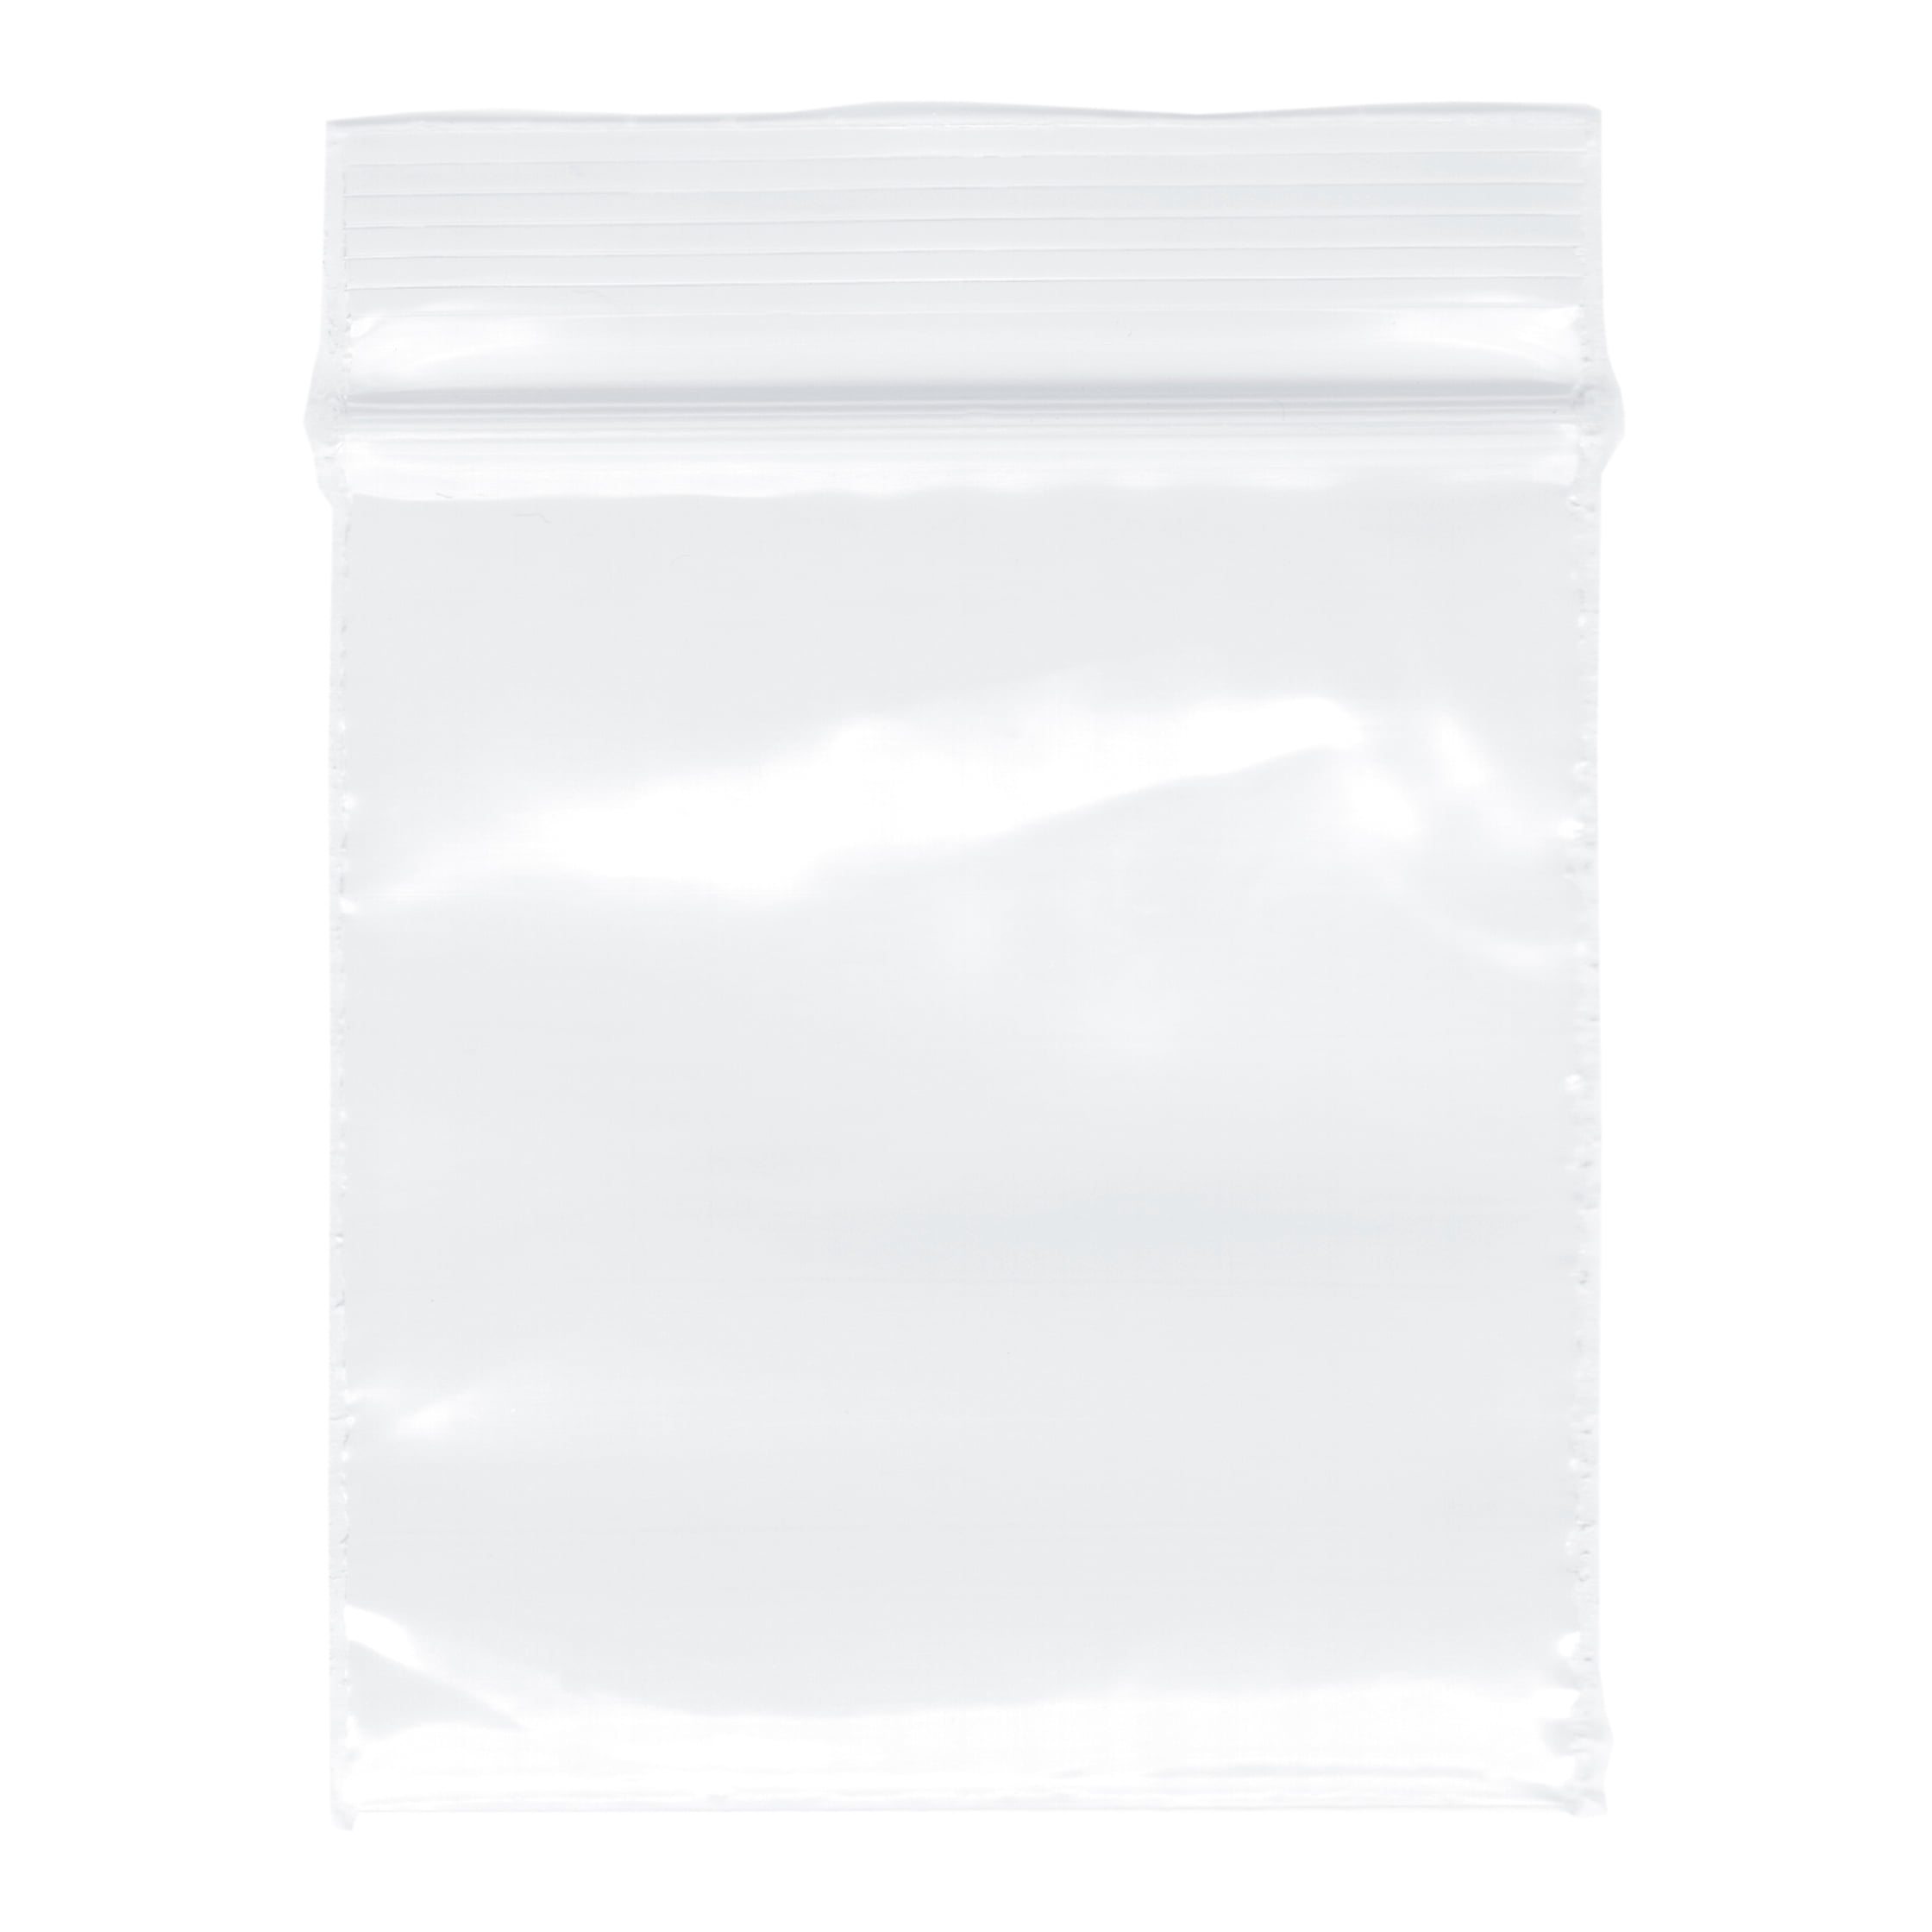 100 NEW 55mmx75mm Small Clear Plastic Bags Baggy Grip Seal 55x75 mm Zip 5.5x7.5